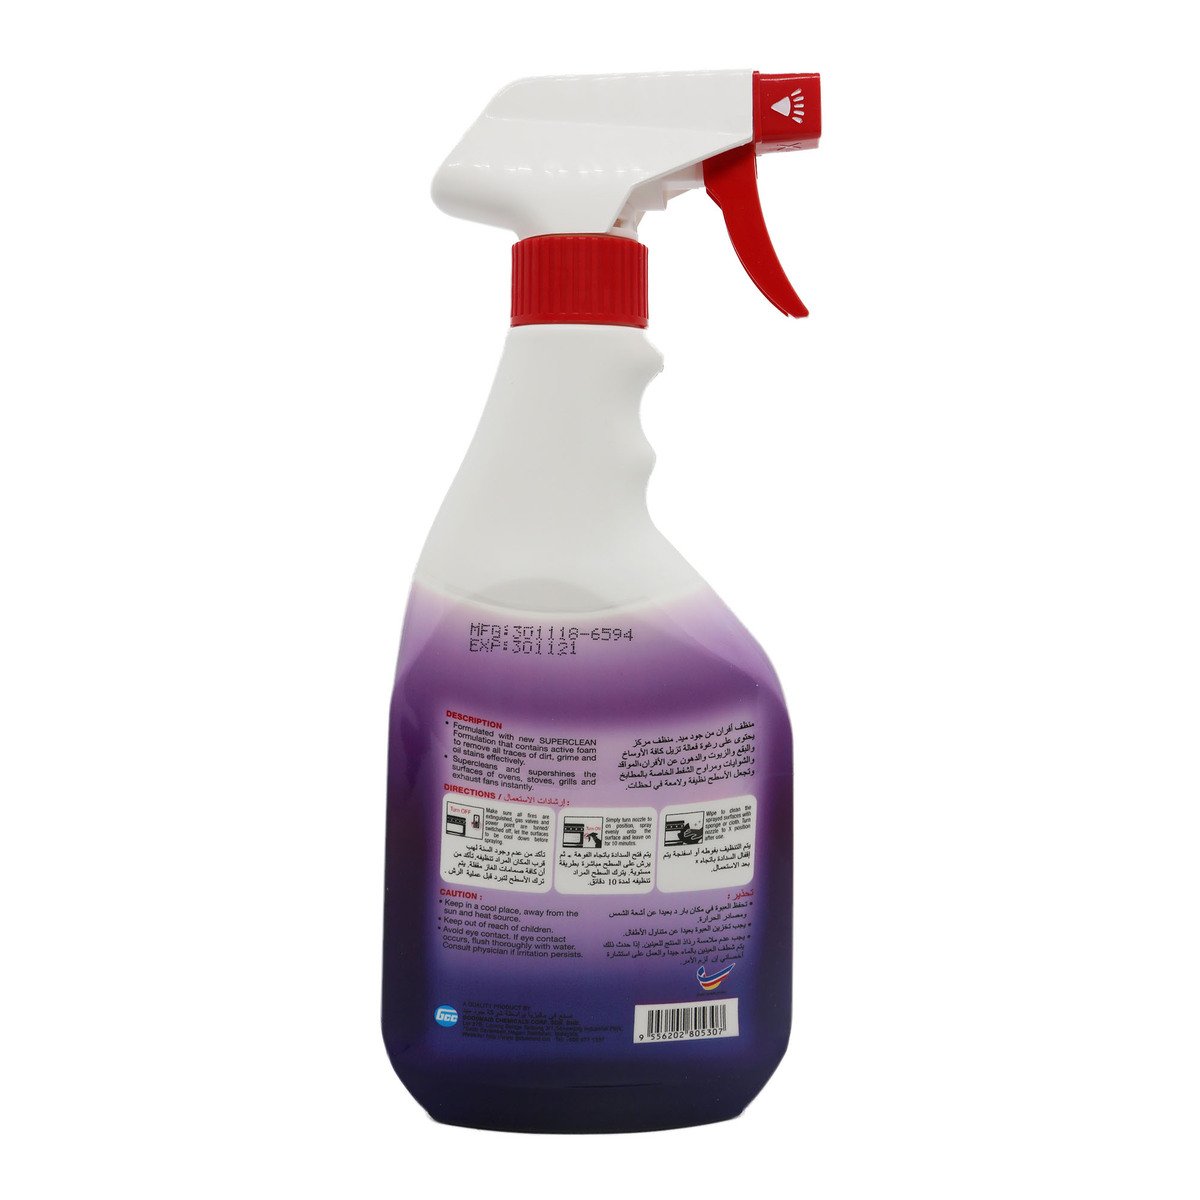 Goodmaid Oven Cleaner 400ml